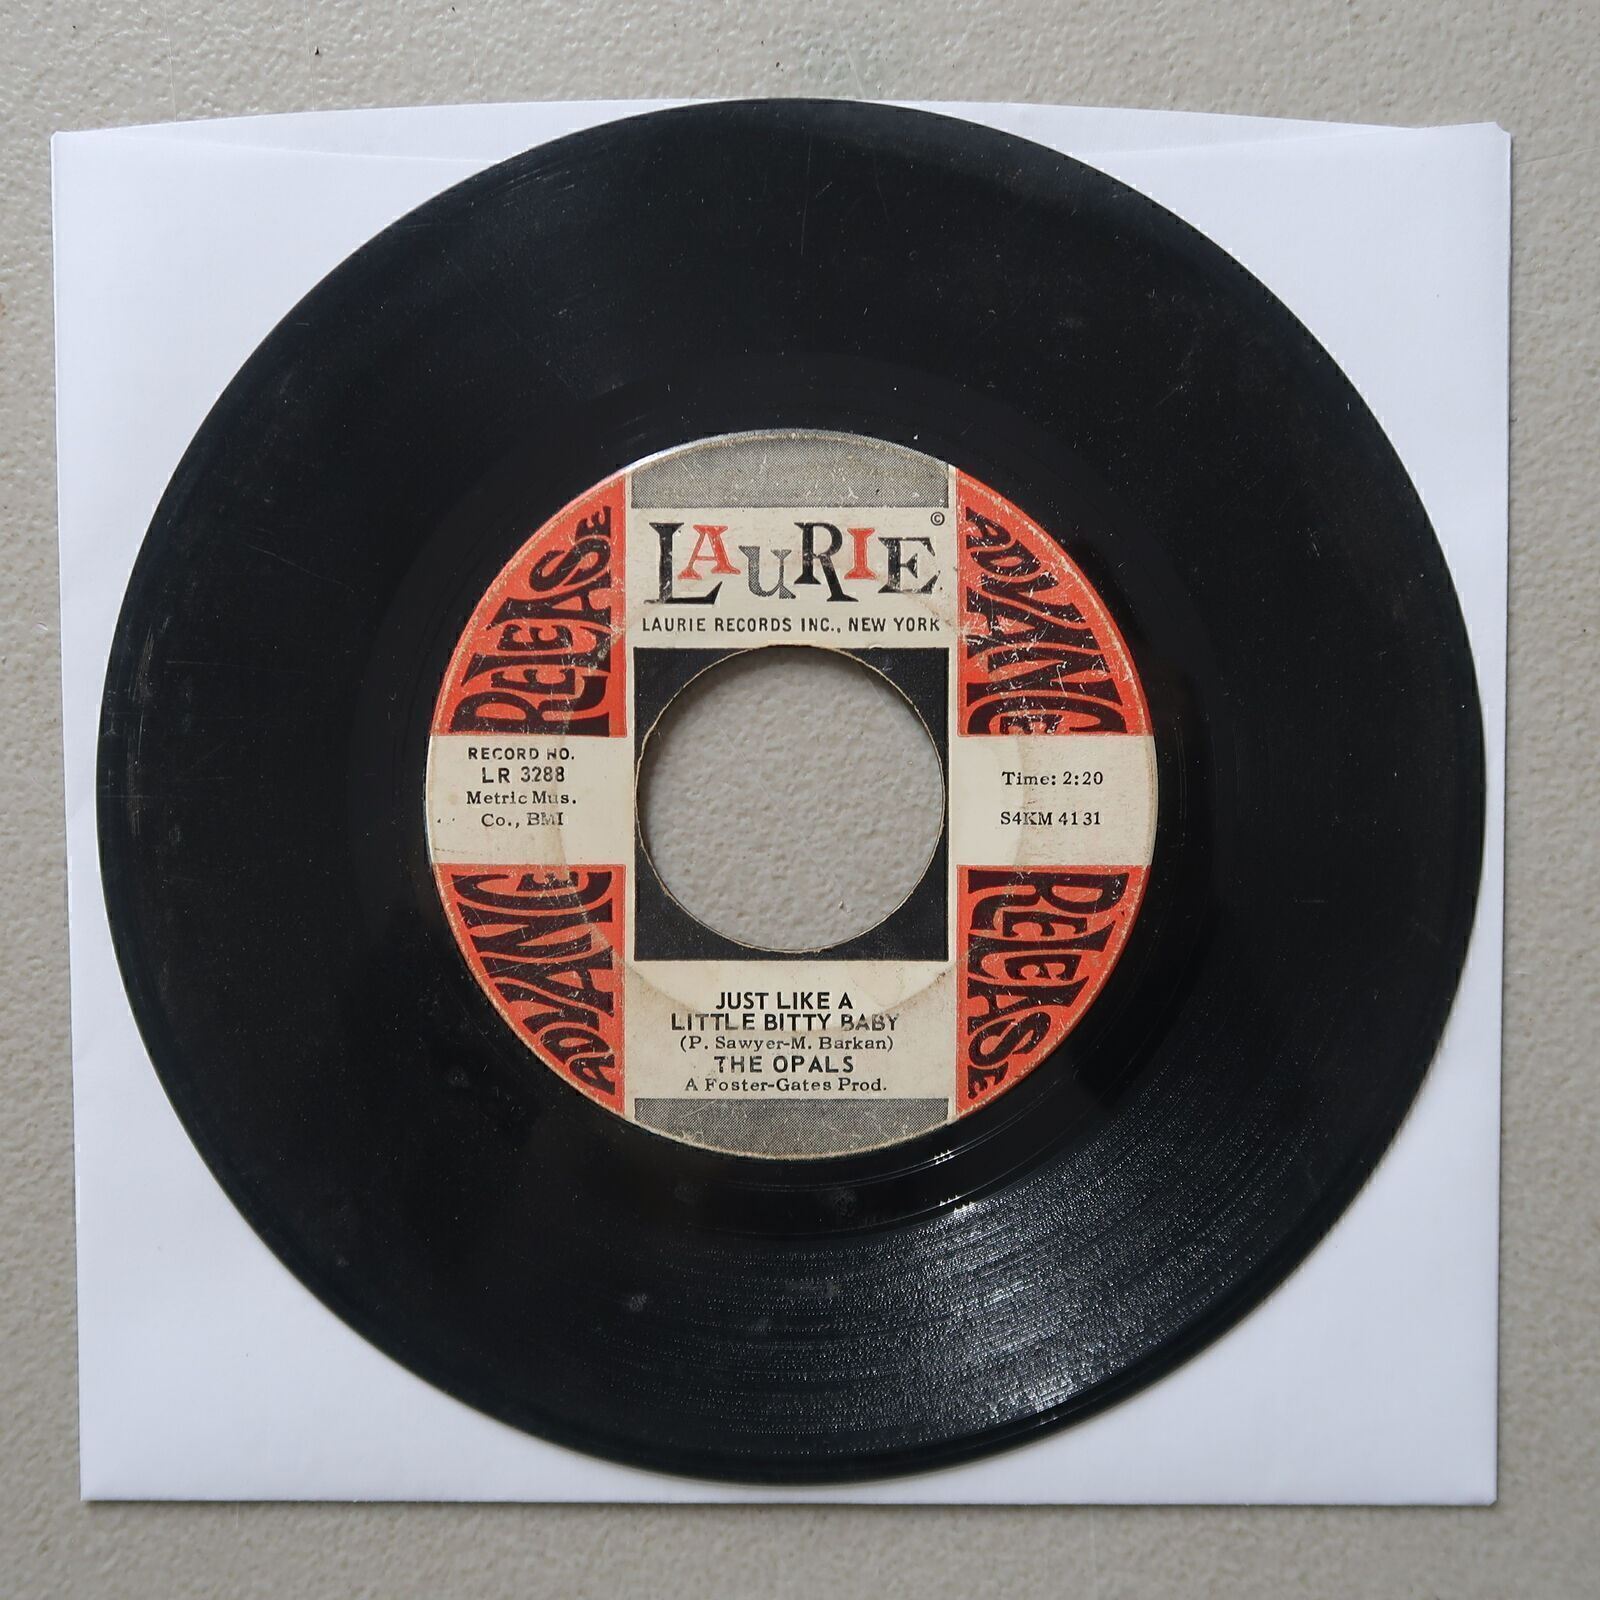 The Opals No, No, Never Again & Just Like A Little Vinyl 45 Laurie VG 9-180